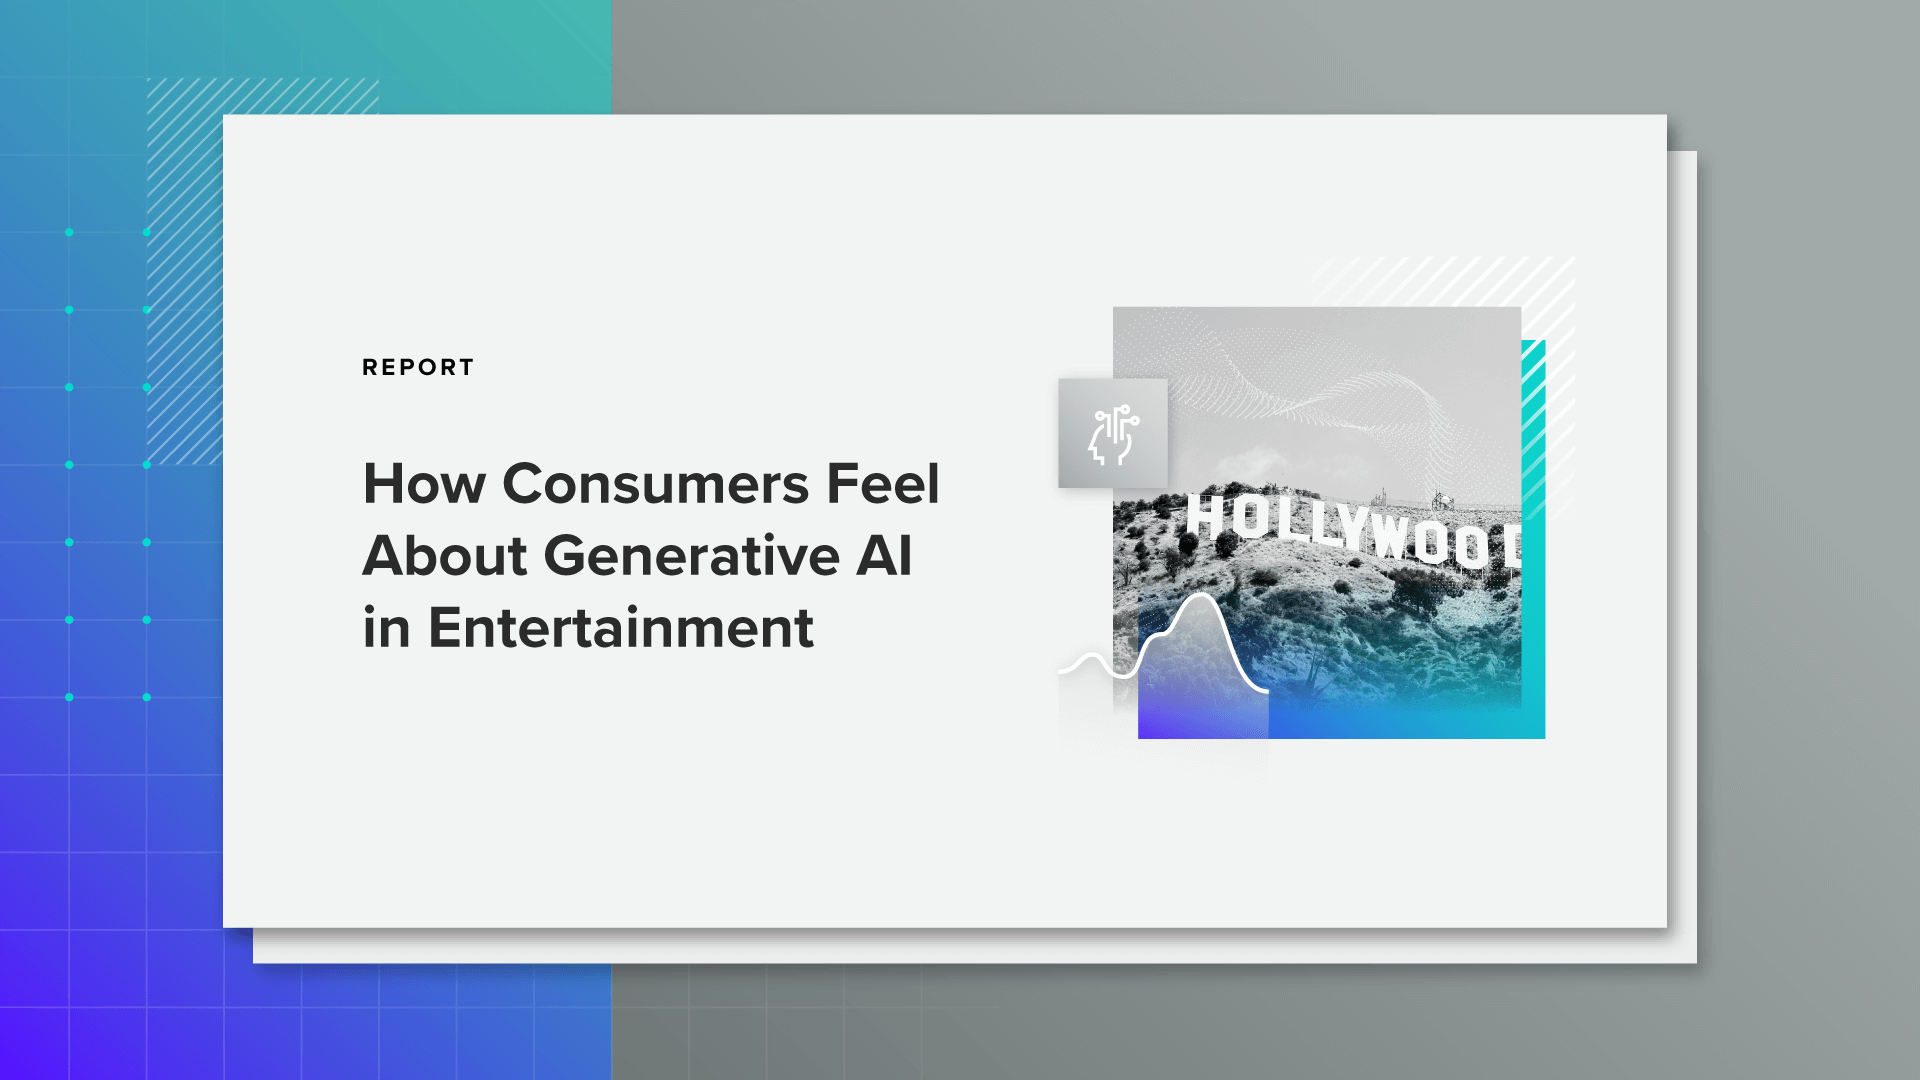 Download the Report: How Consumers Feel About Generative AI in Entertainment